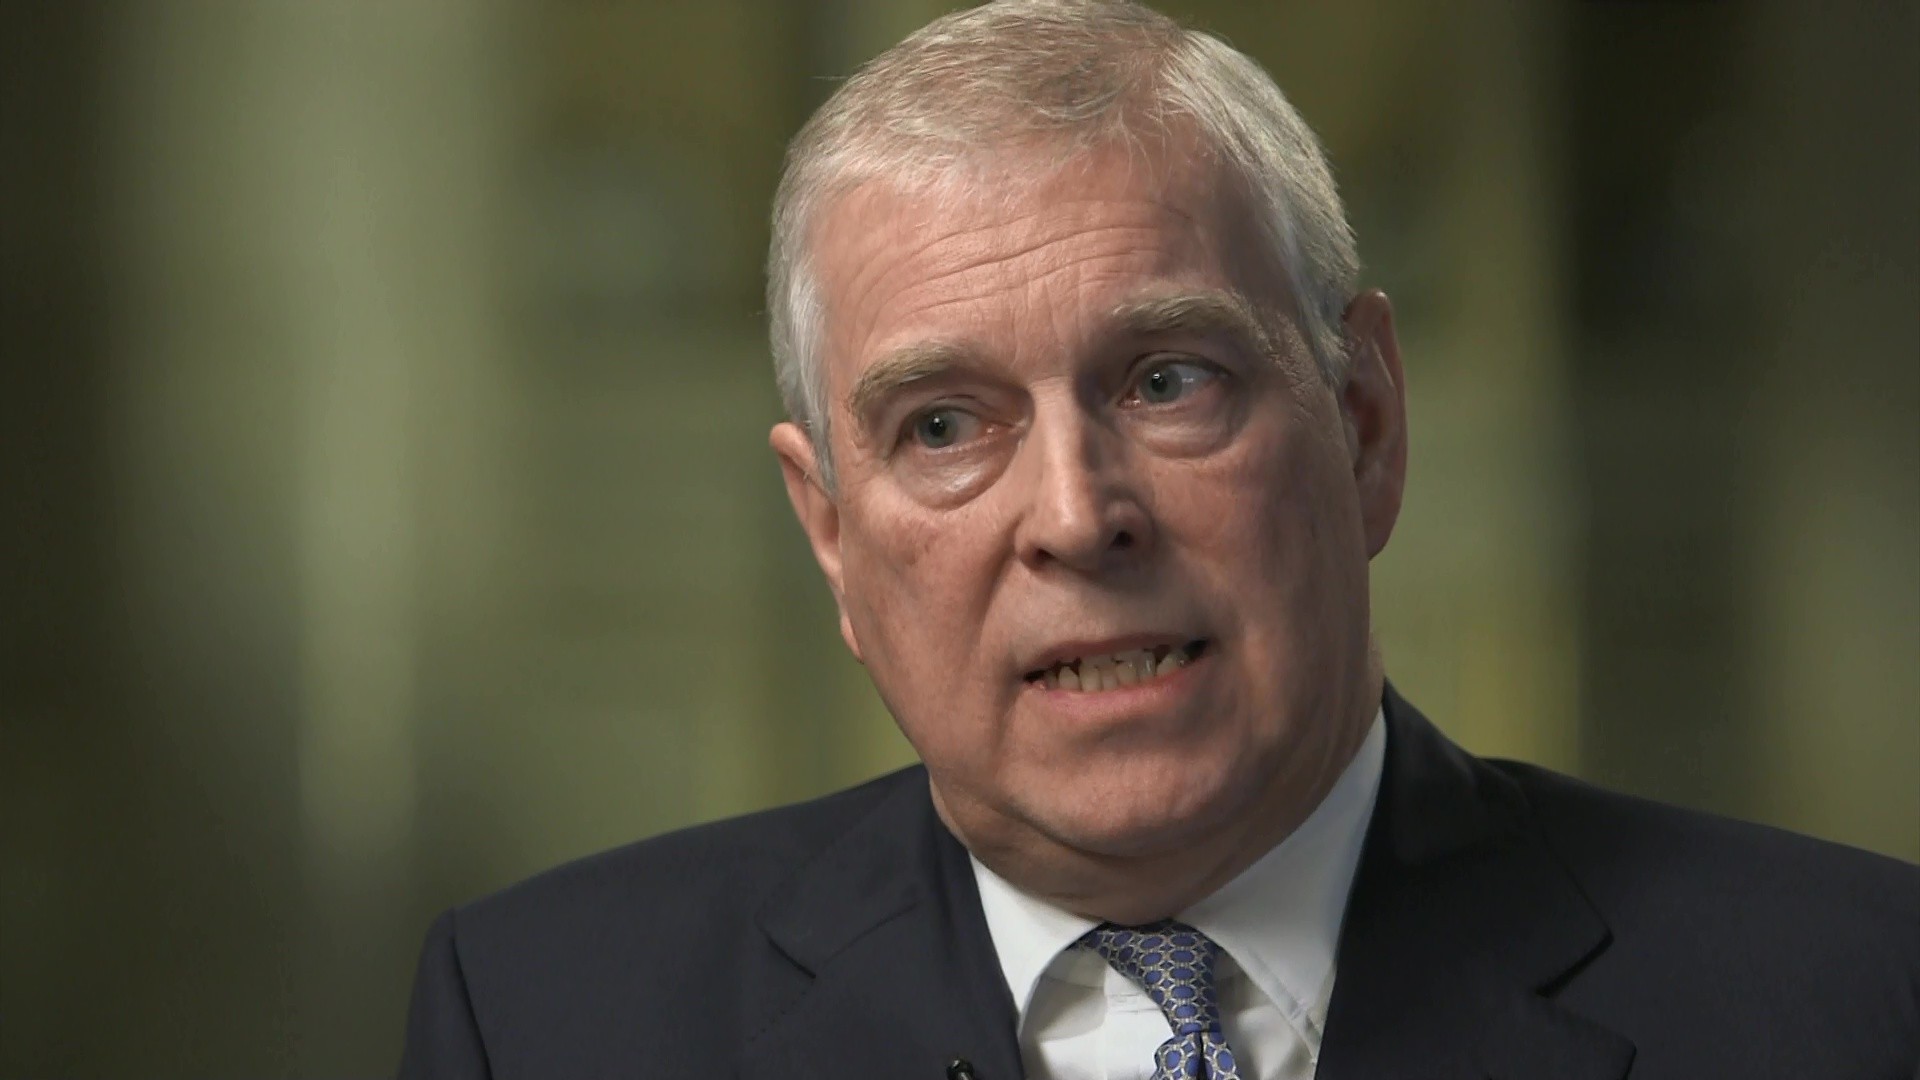 Prince Andrew was blasted for not showing compassion for the victims of Epstein